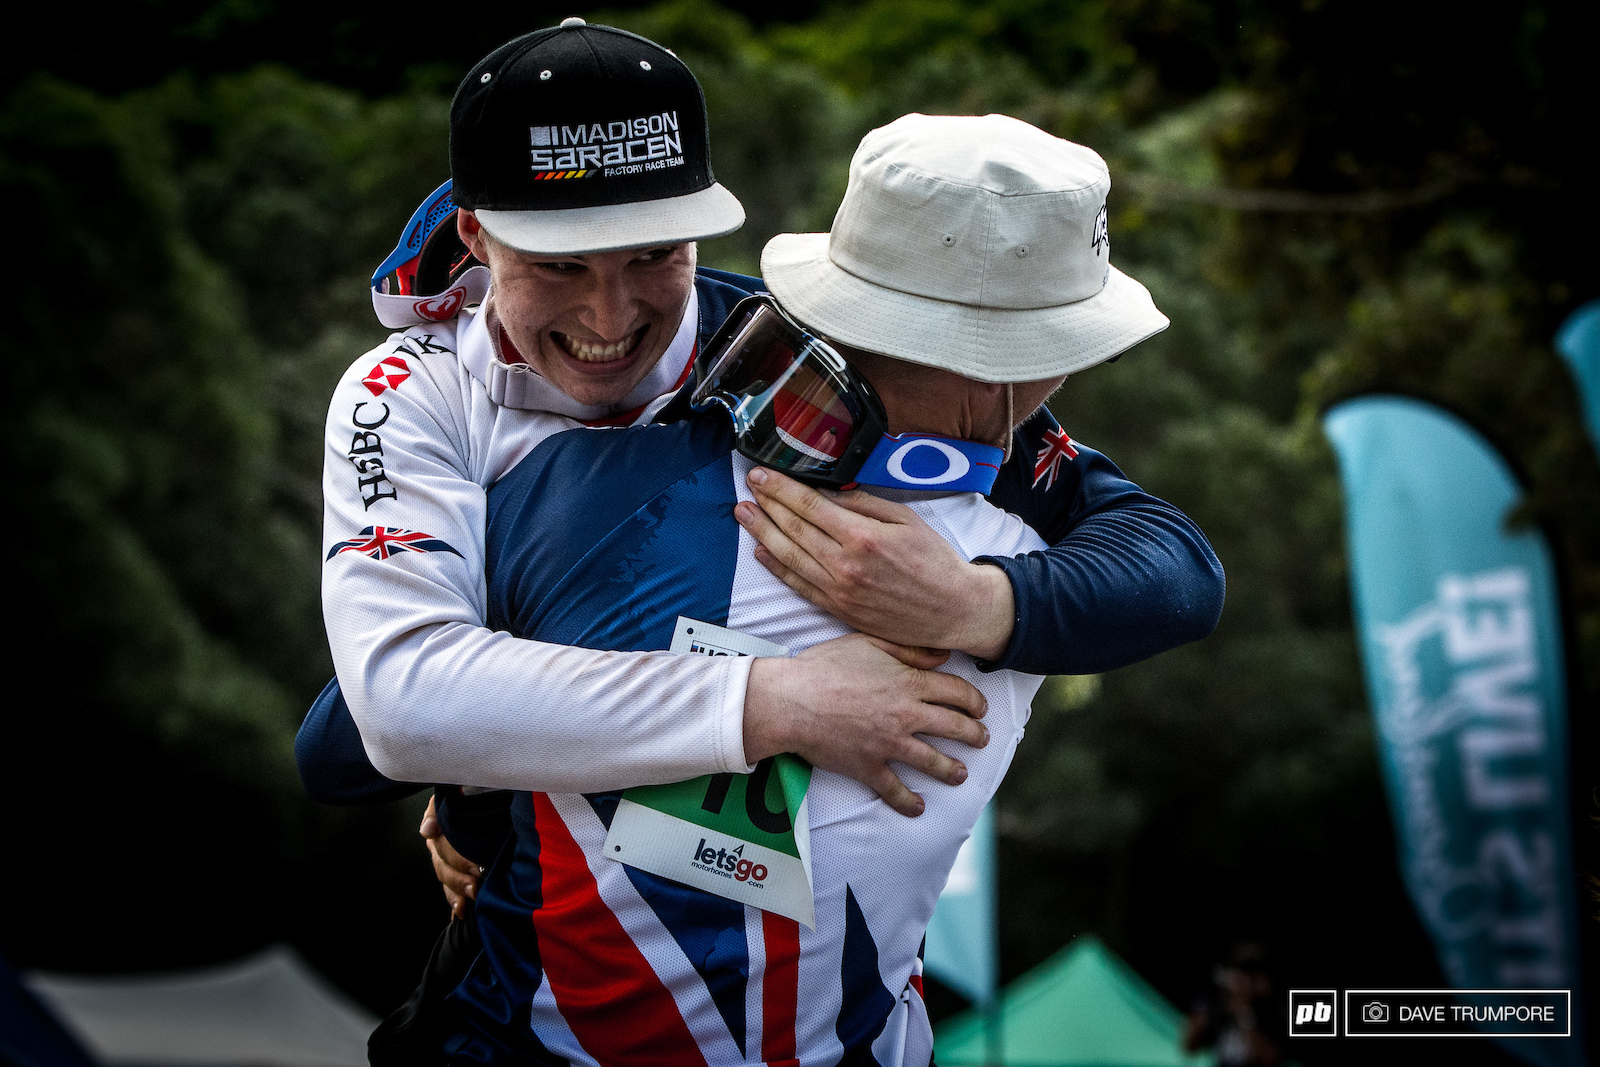 Kaos Seagrave hoists up a very happy Matt Walker as he clinched the junior world title.